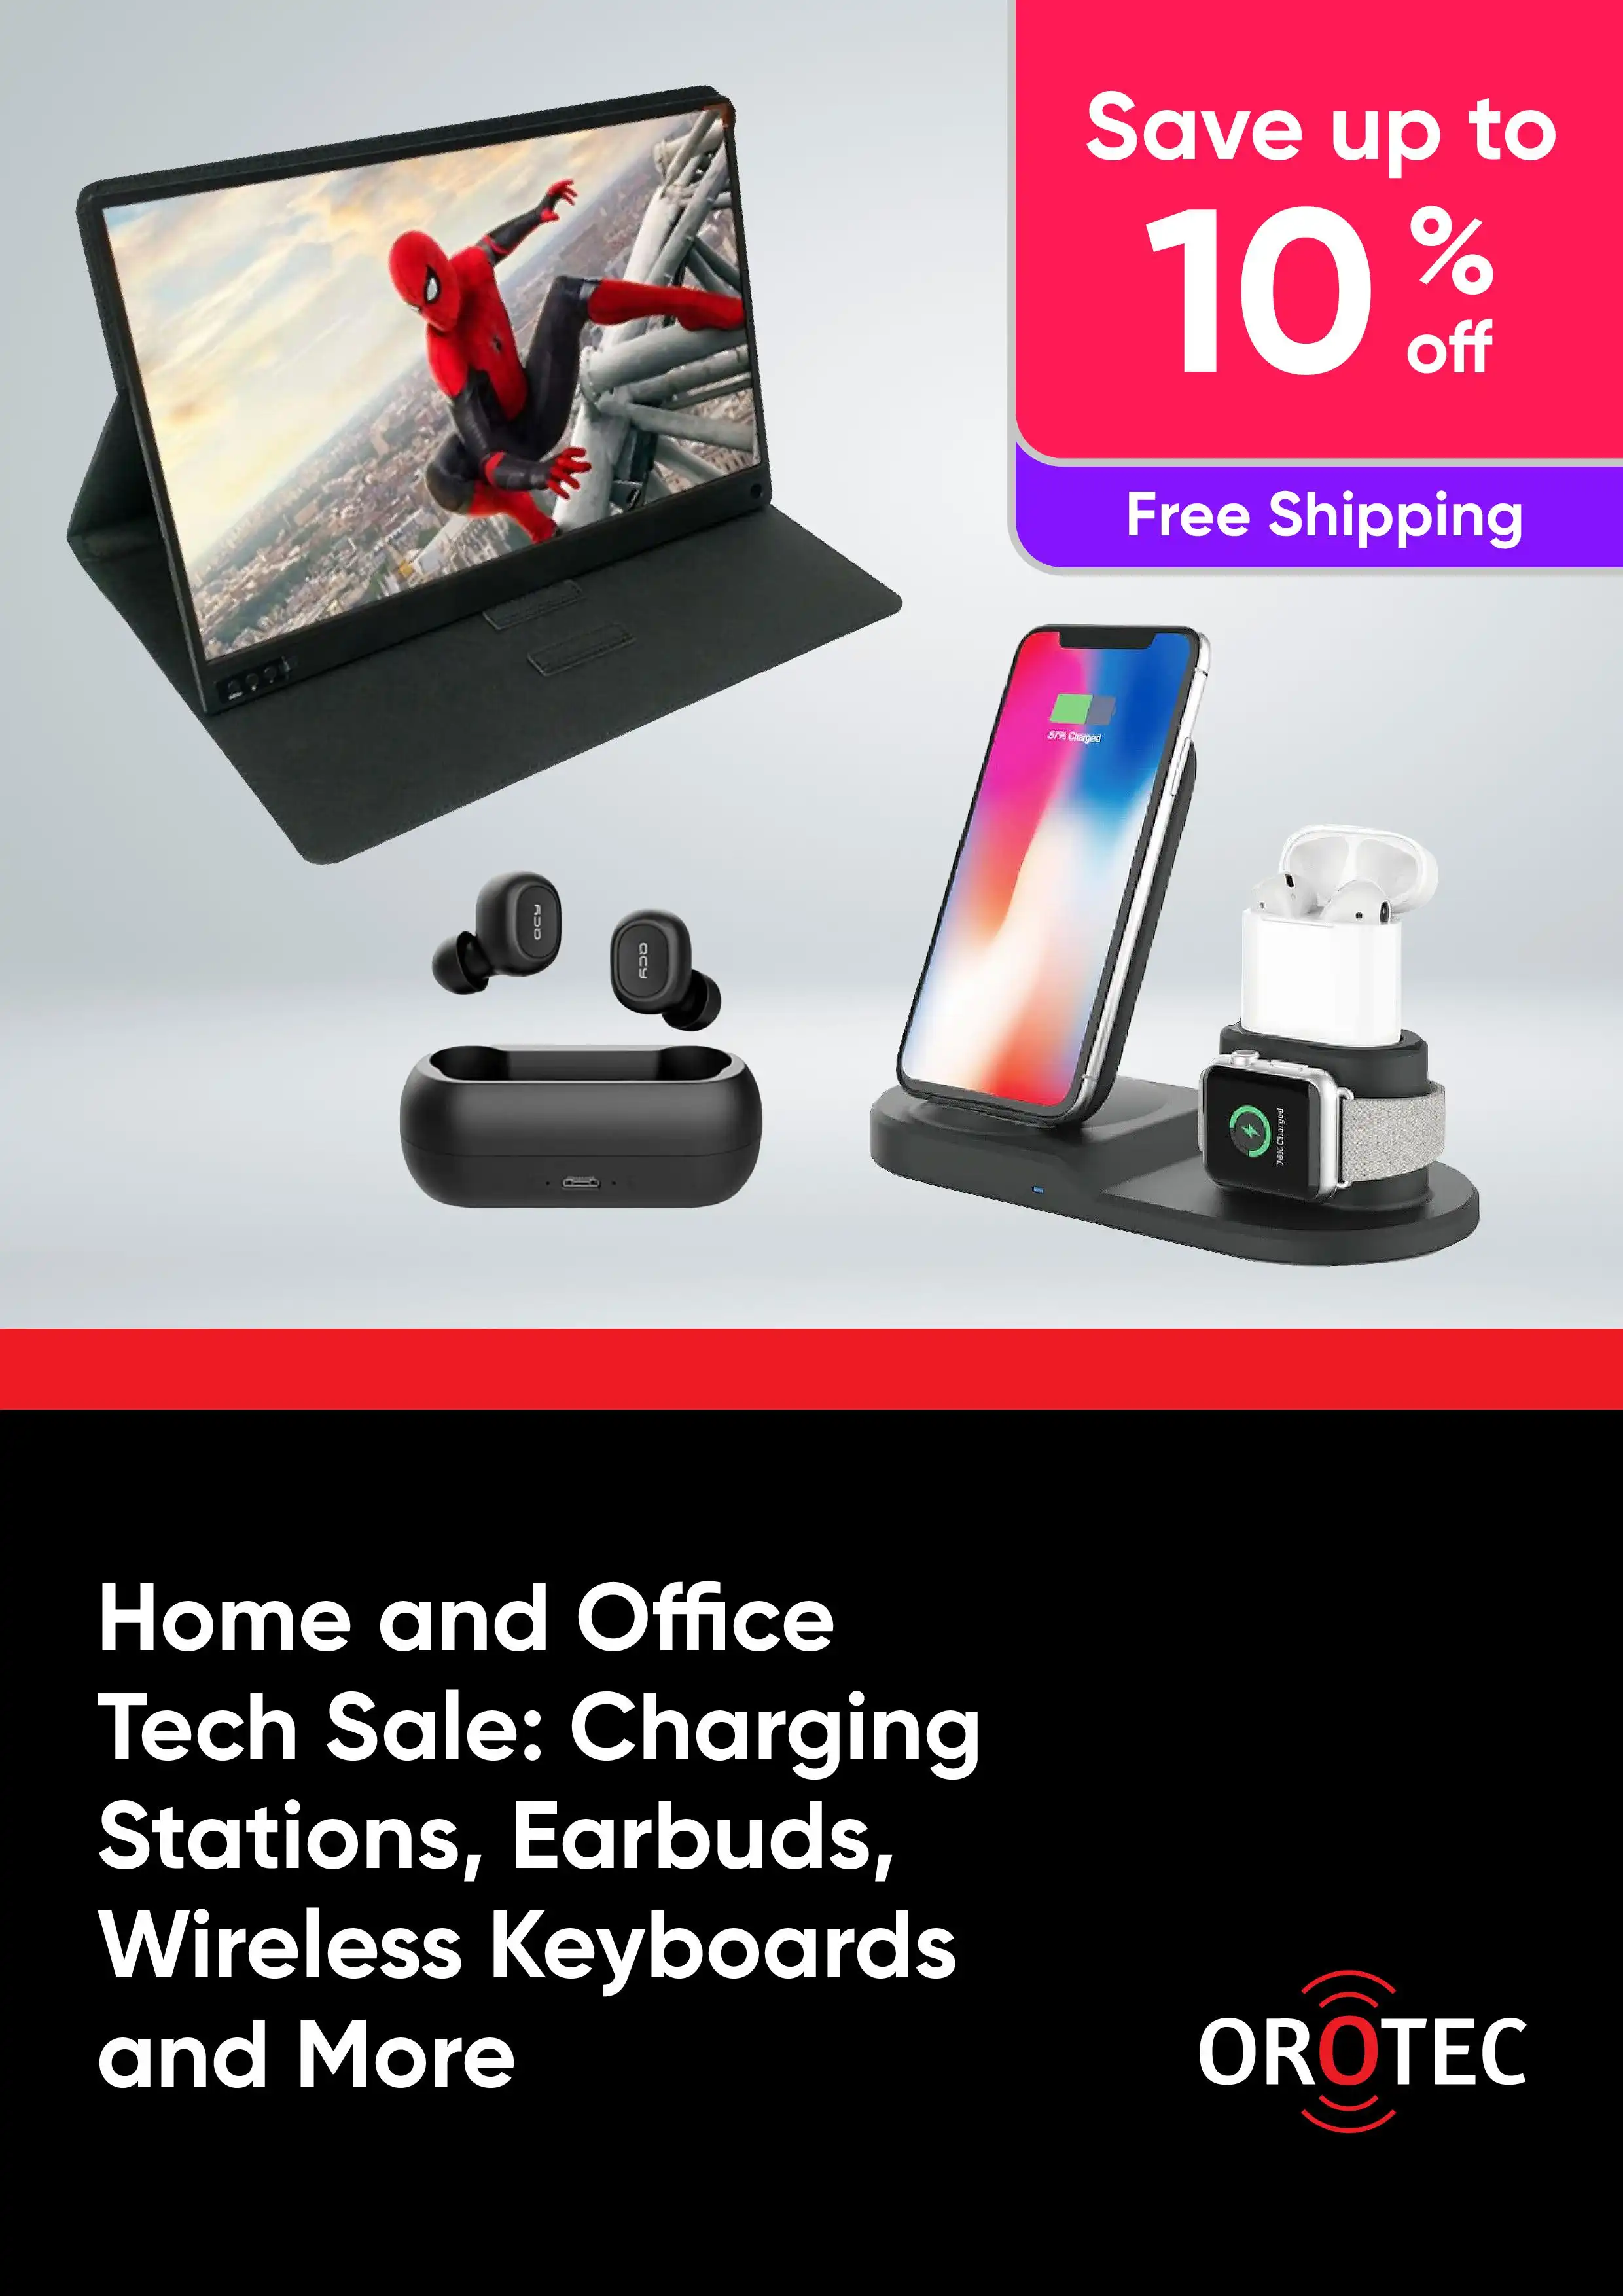 Home and Office Tech Sale - Charging Stations, Earbuds, Wireless Keyboards and More - up to 65% off